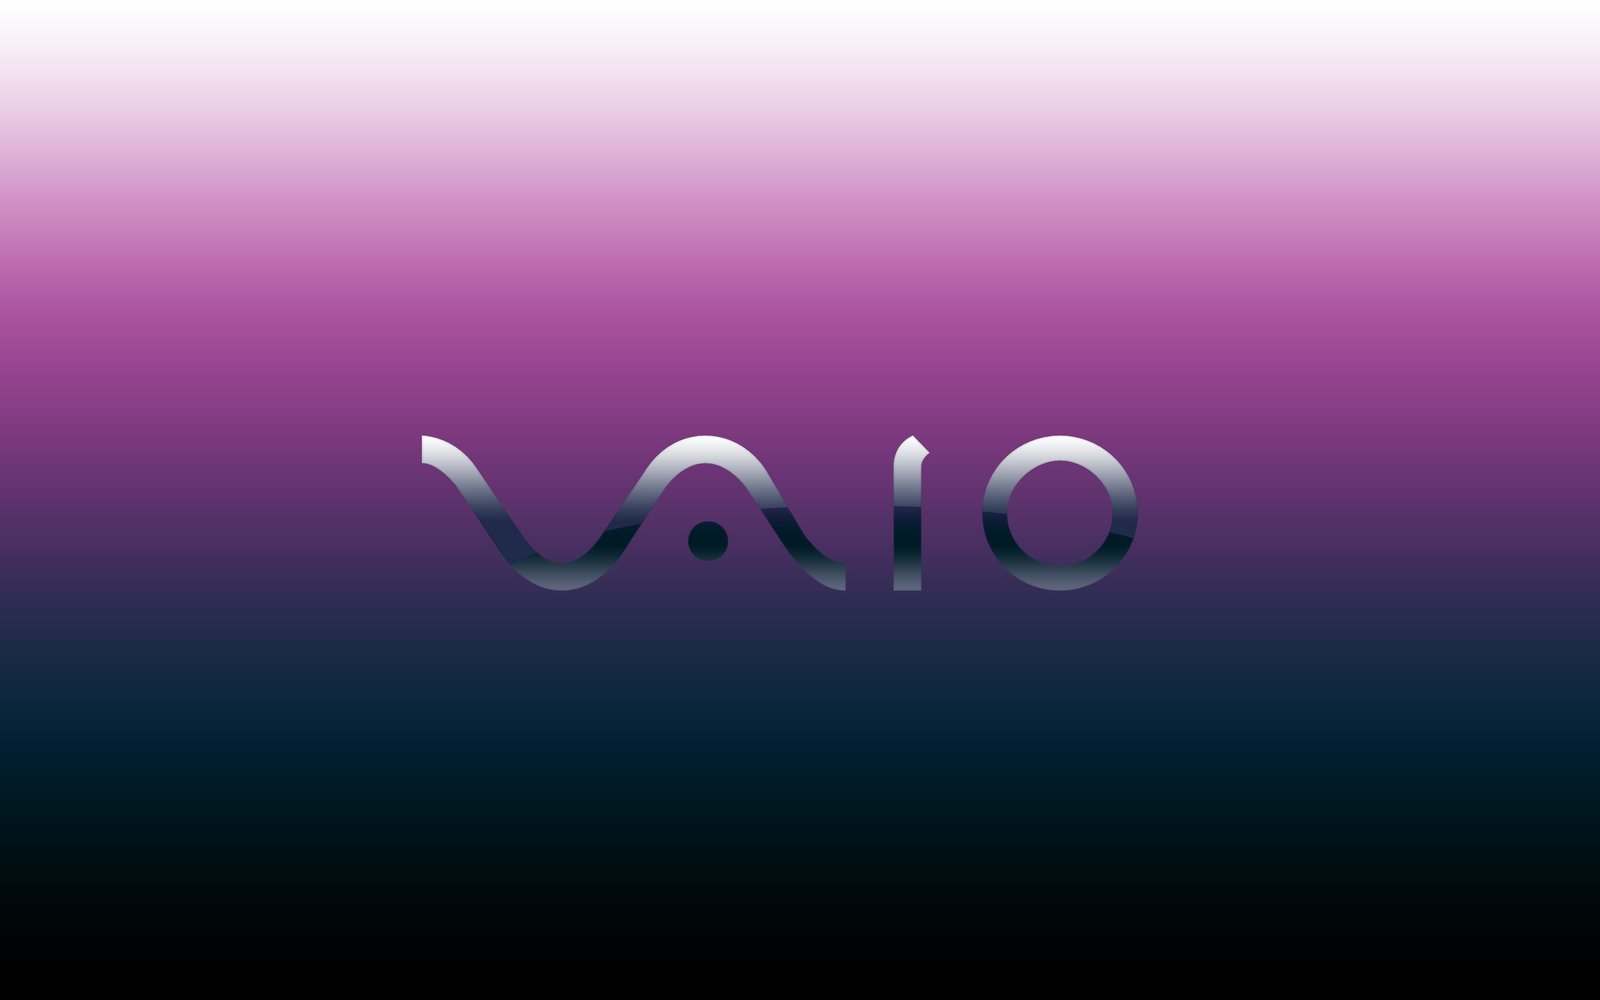 Free download Sony Vaio Wallpaper Image amp Picture Becuo [1600x1000] for your Desktop, Mobile & Tablet. Explore Sony Vaio Wallpaper. Sony Vaio Wallpaper, Vaio Wallpaper, Sony Vaio Wallpaper 1366x768